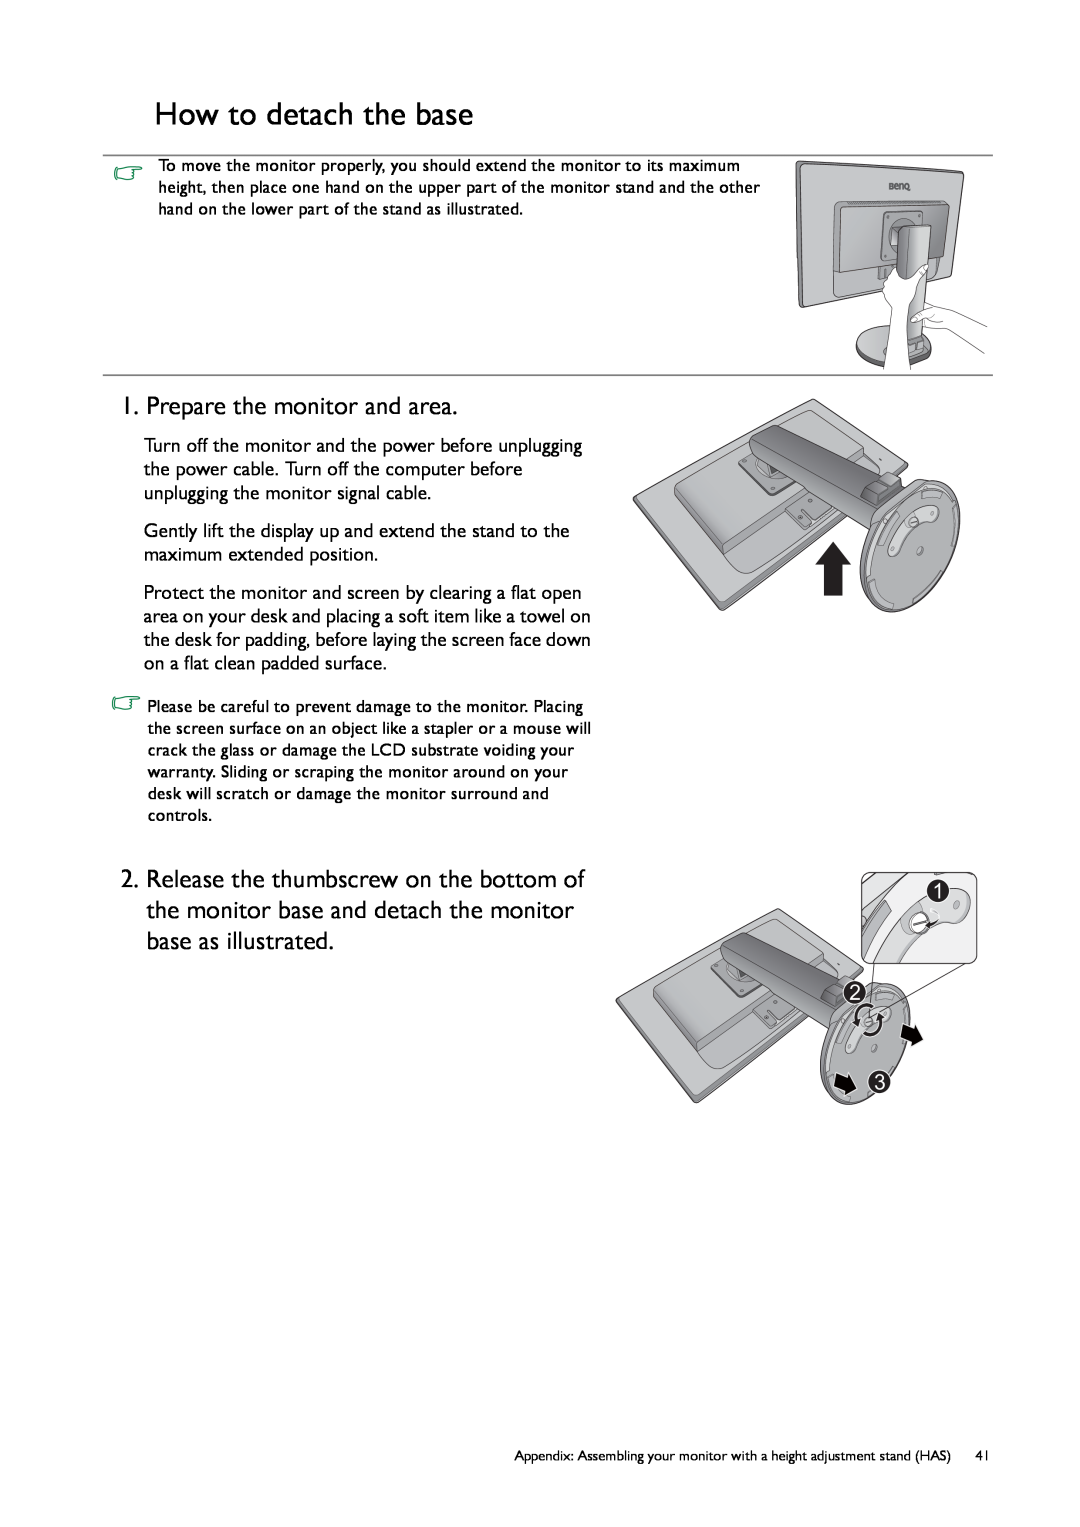 BenQ GL50, G50 user manual How to detach the base, Prepare the monitor and area 